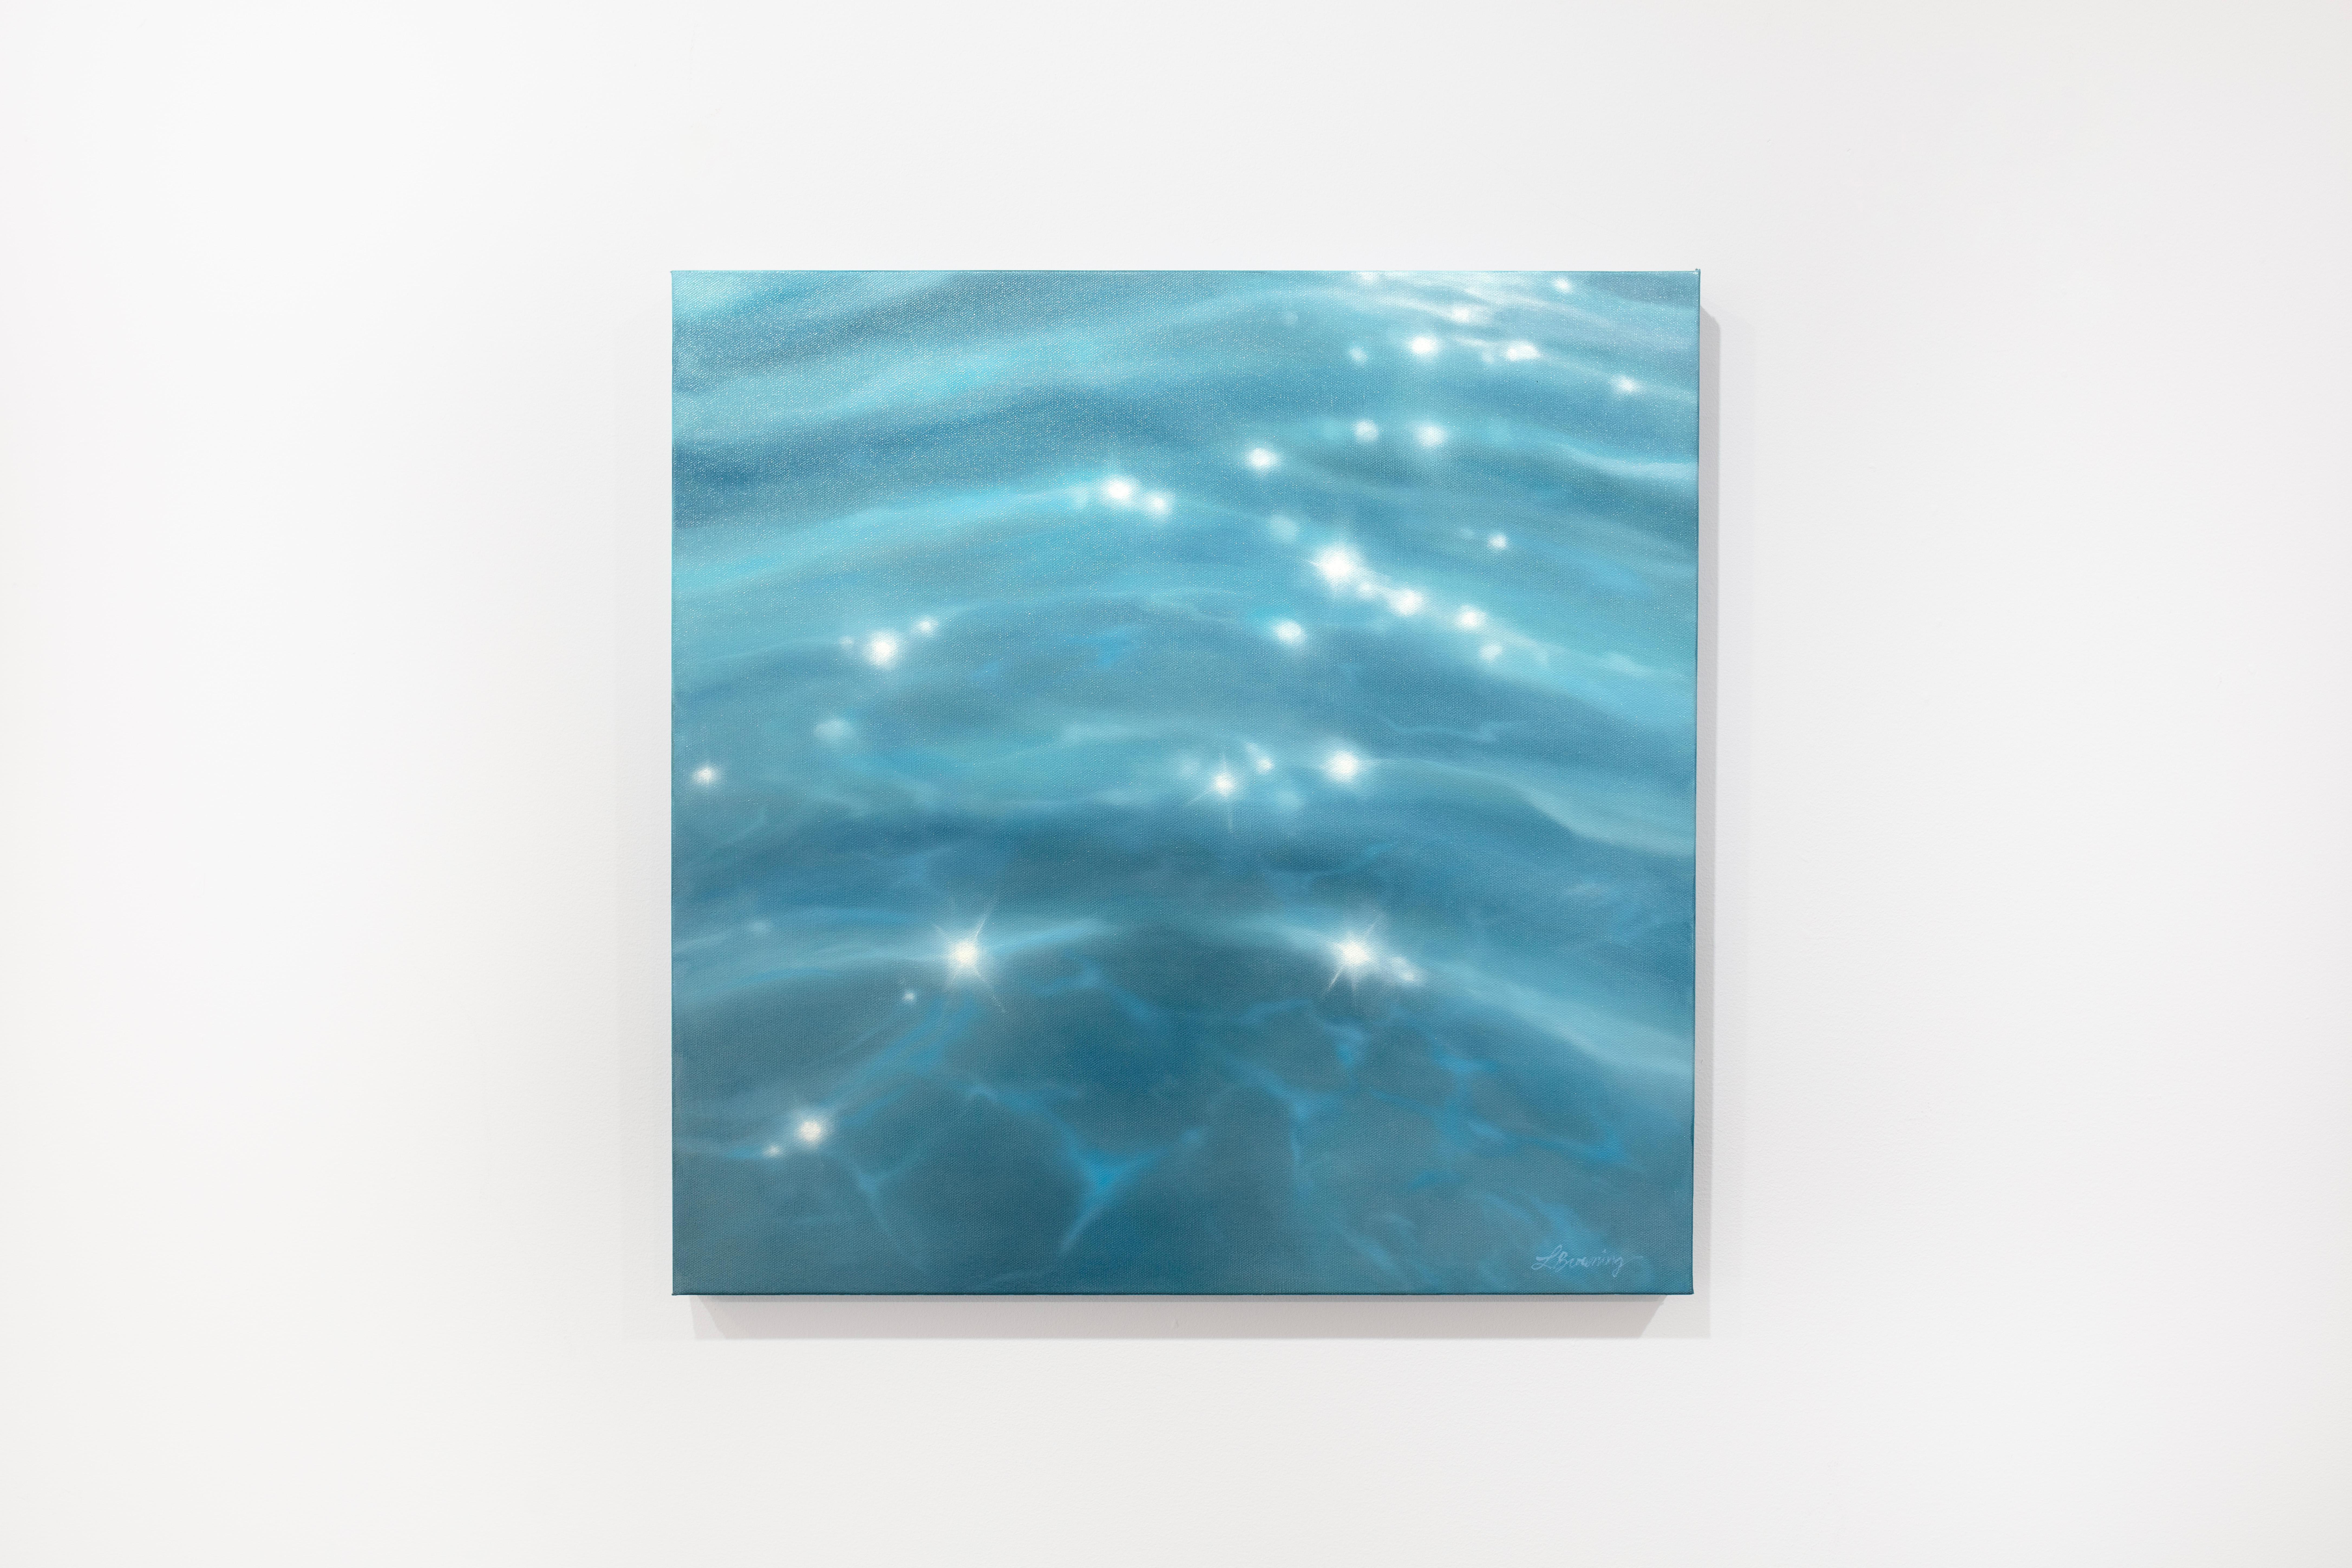 This blue coastal oil painting by artist Laura Browning features a cropped view of open water as light reflects and glistens off its surface. The painting measures 24" x 24" and is made on gallery wrapped canvas, with the painting continuing over